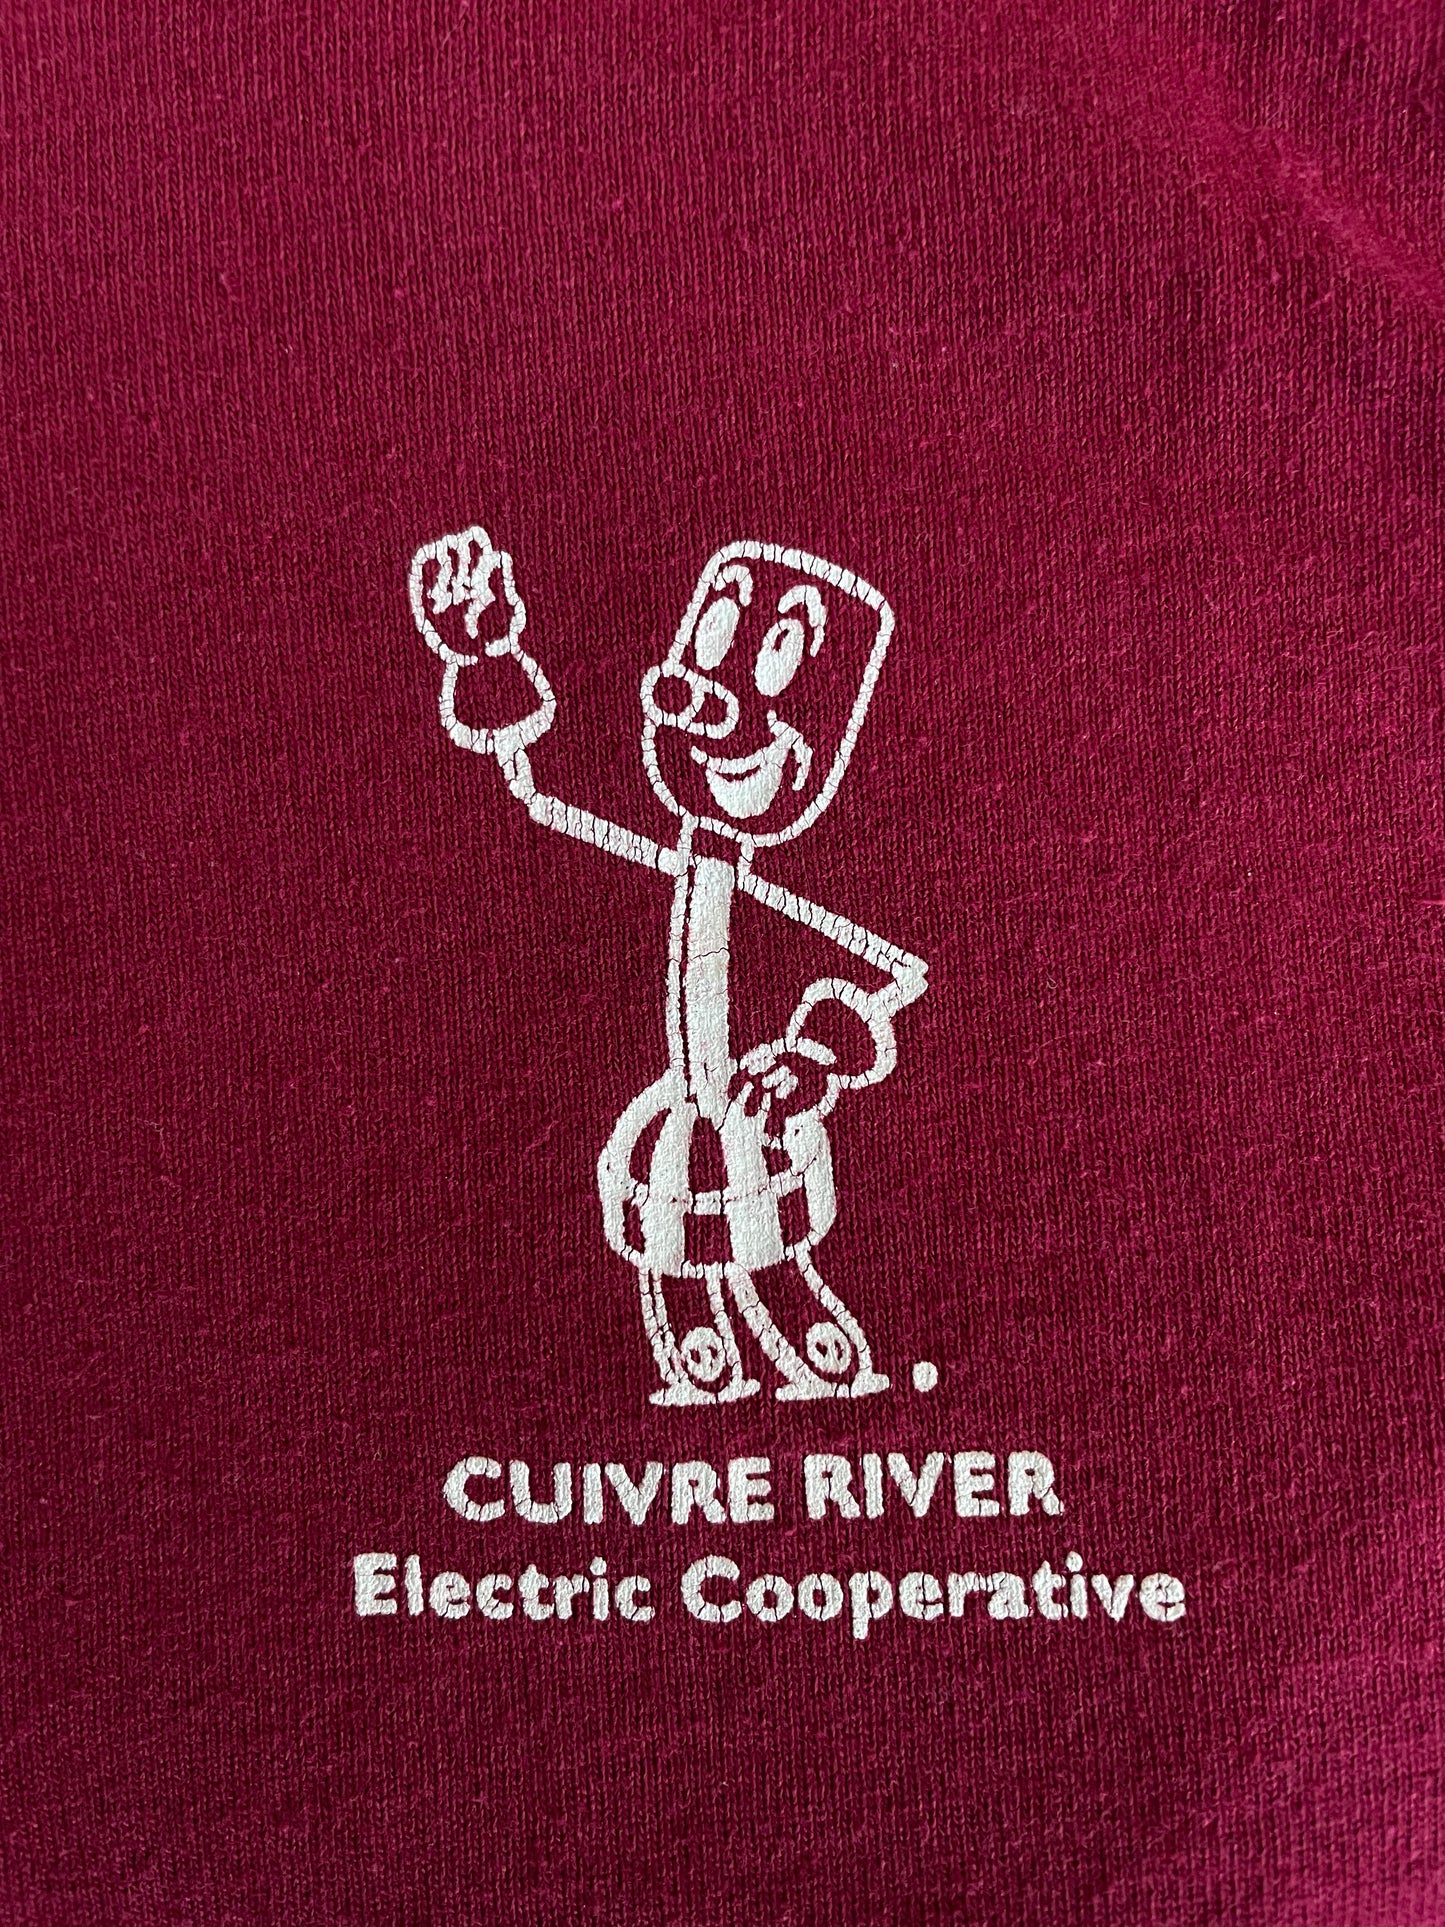 80s Cuivre River Electric Cooperative Tee